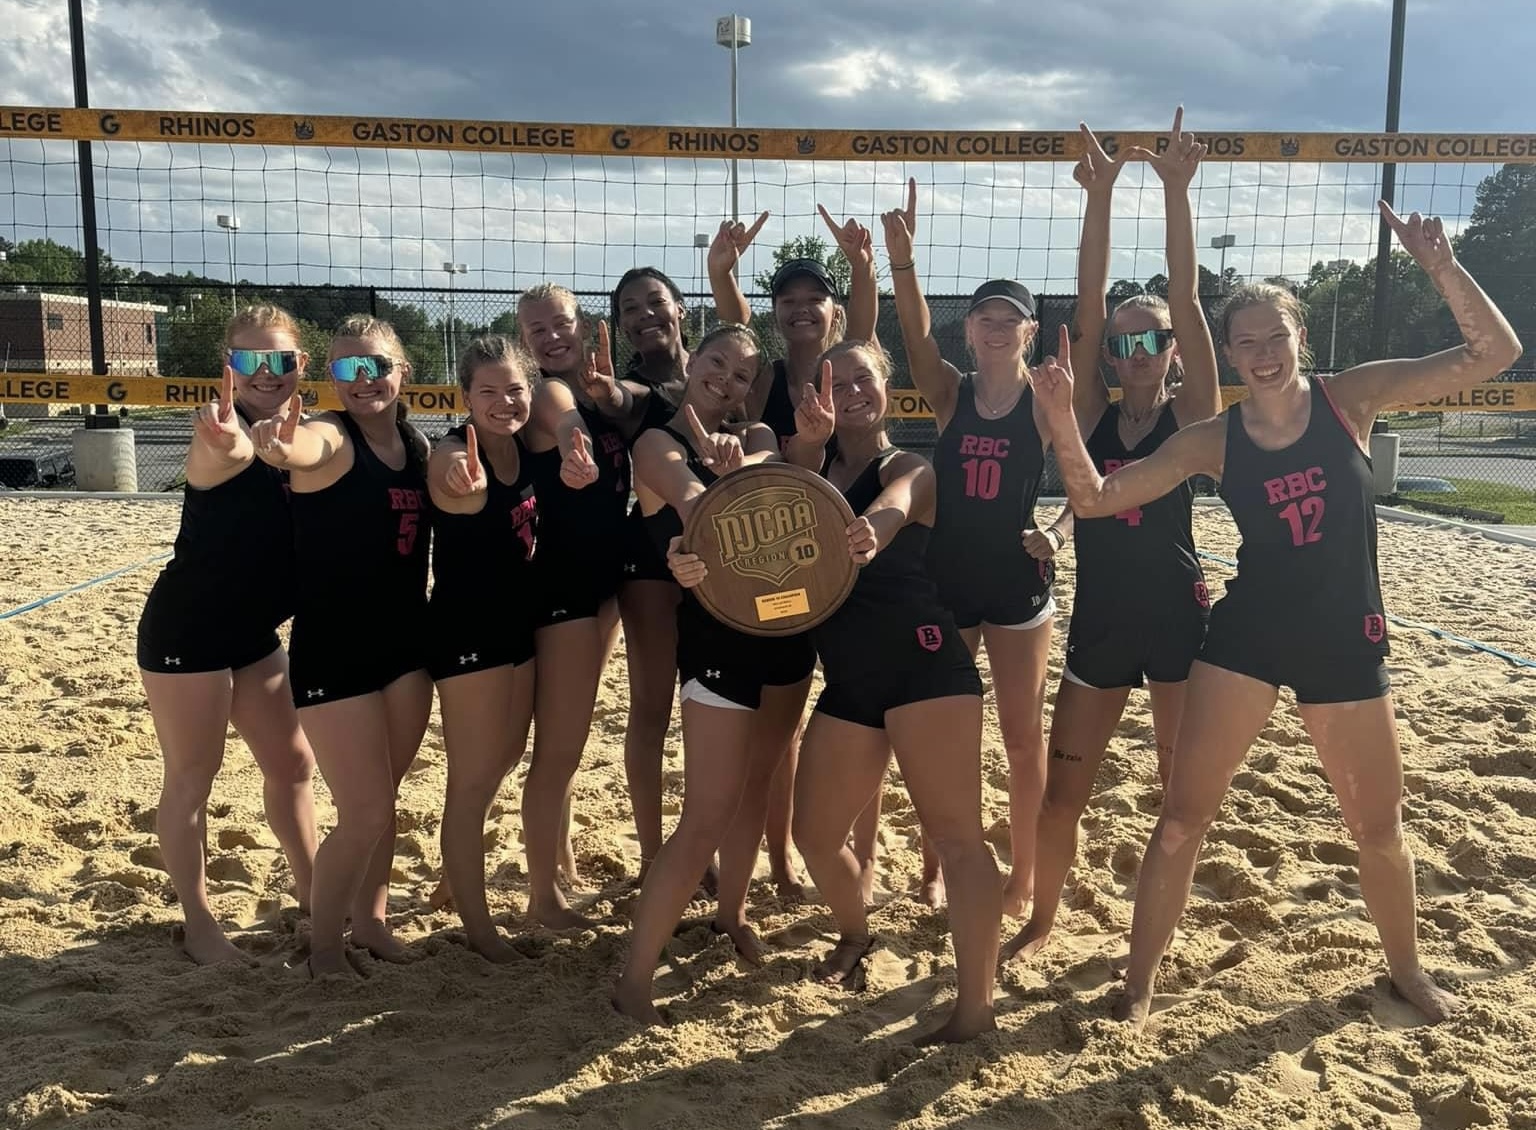 Richard Bland repeats as Region 10 Beach Volleyball Champs